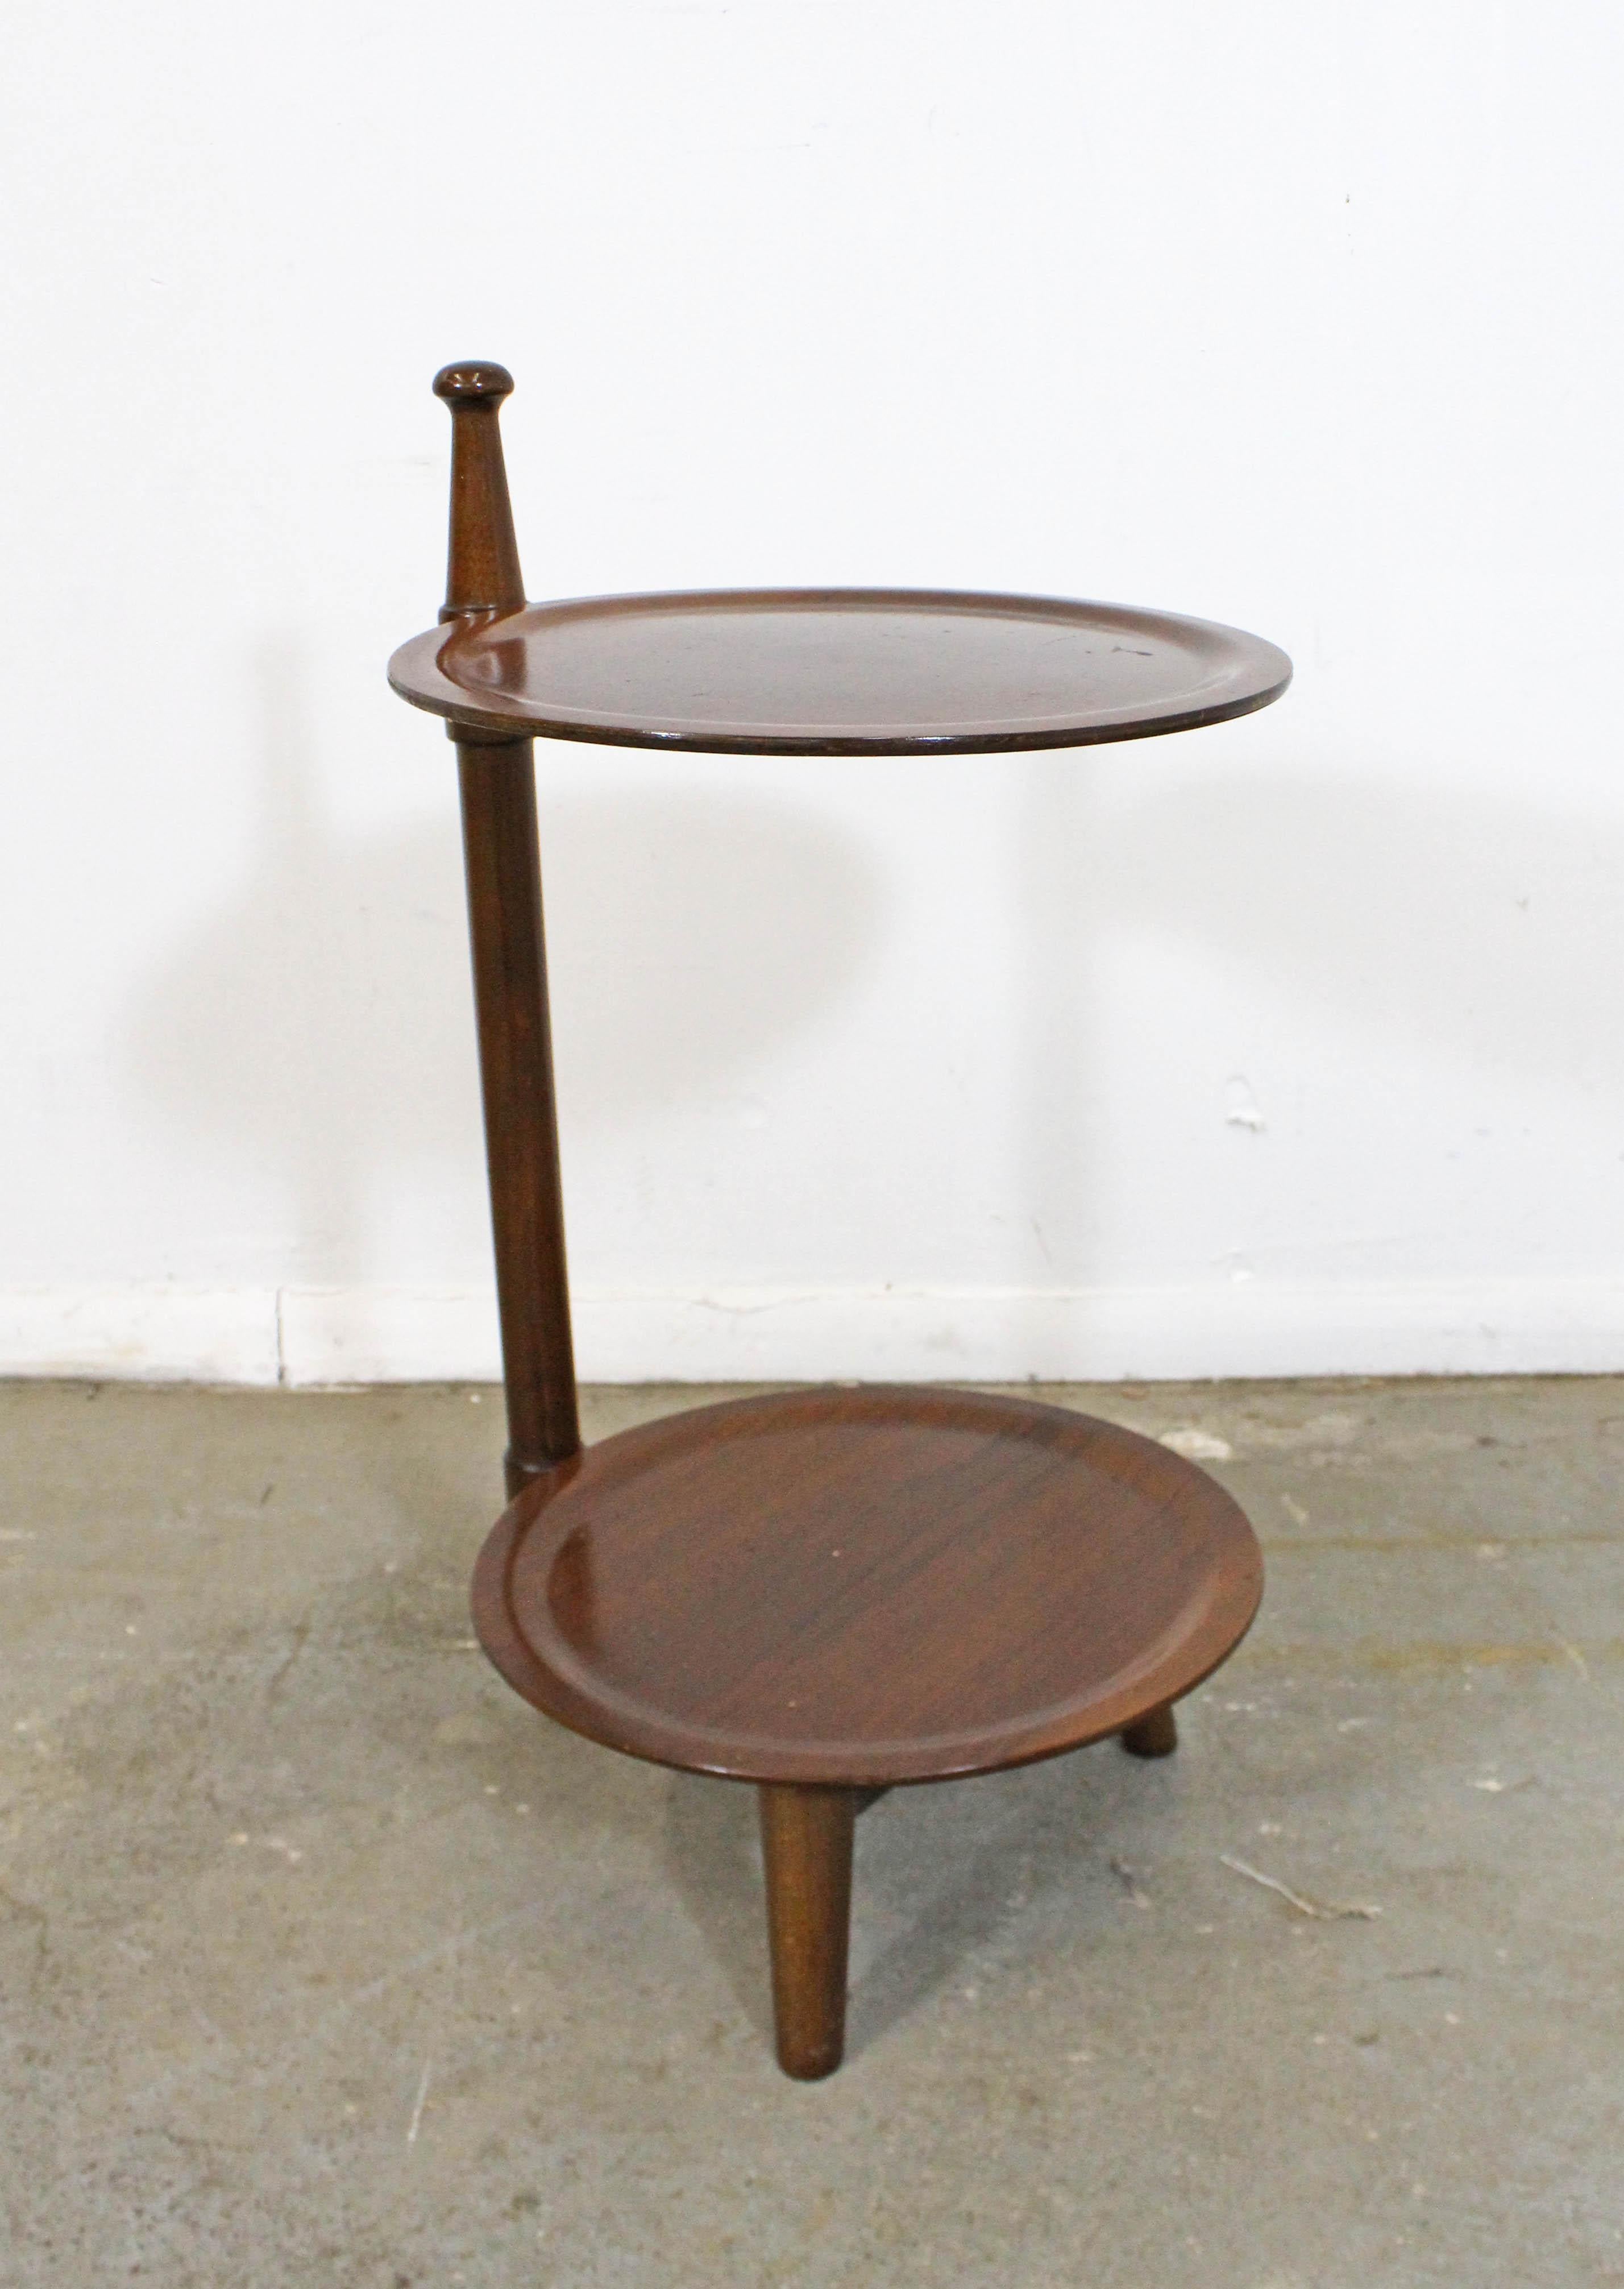 What a find! Offered is a vintage Mid-Century Modern plant stand with great modern look to it. This table looks to be walnut, has 2 round tiers and tapered legs. It is small and light. In good condition with some surface wear/scratches and stains.